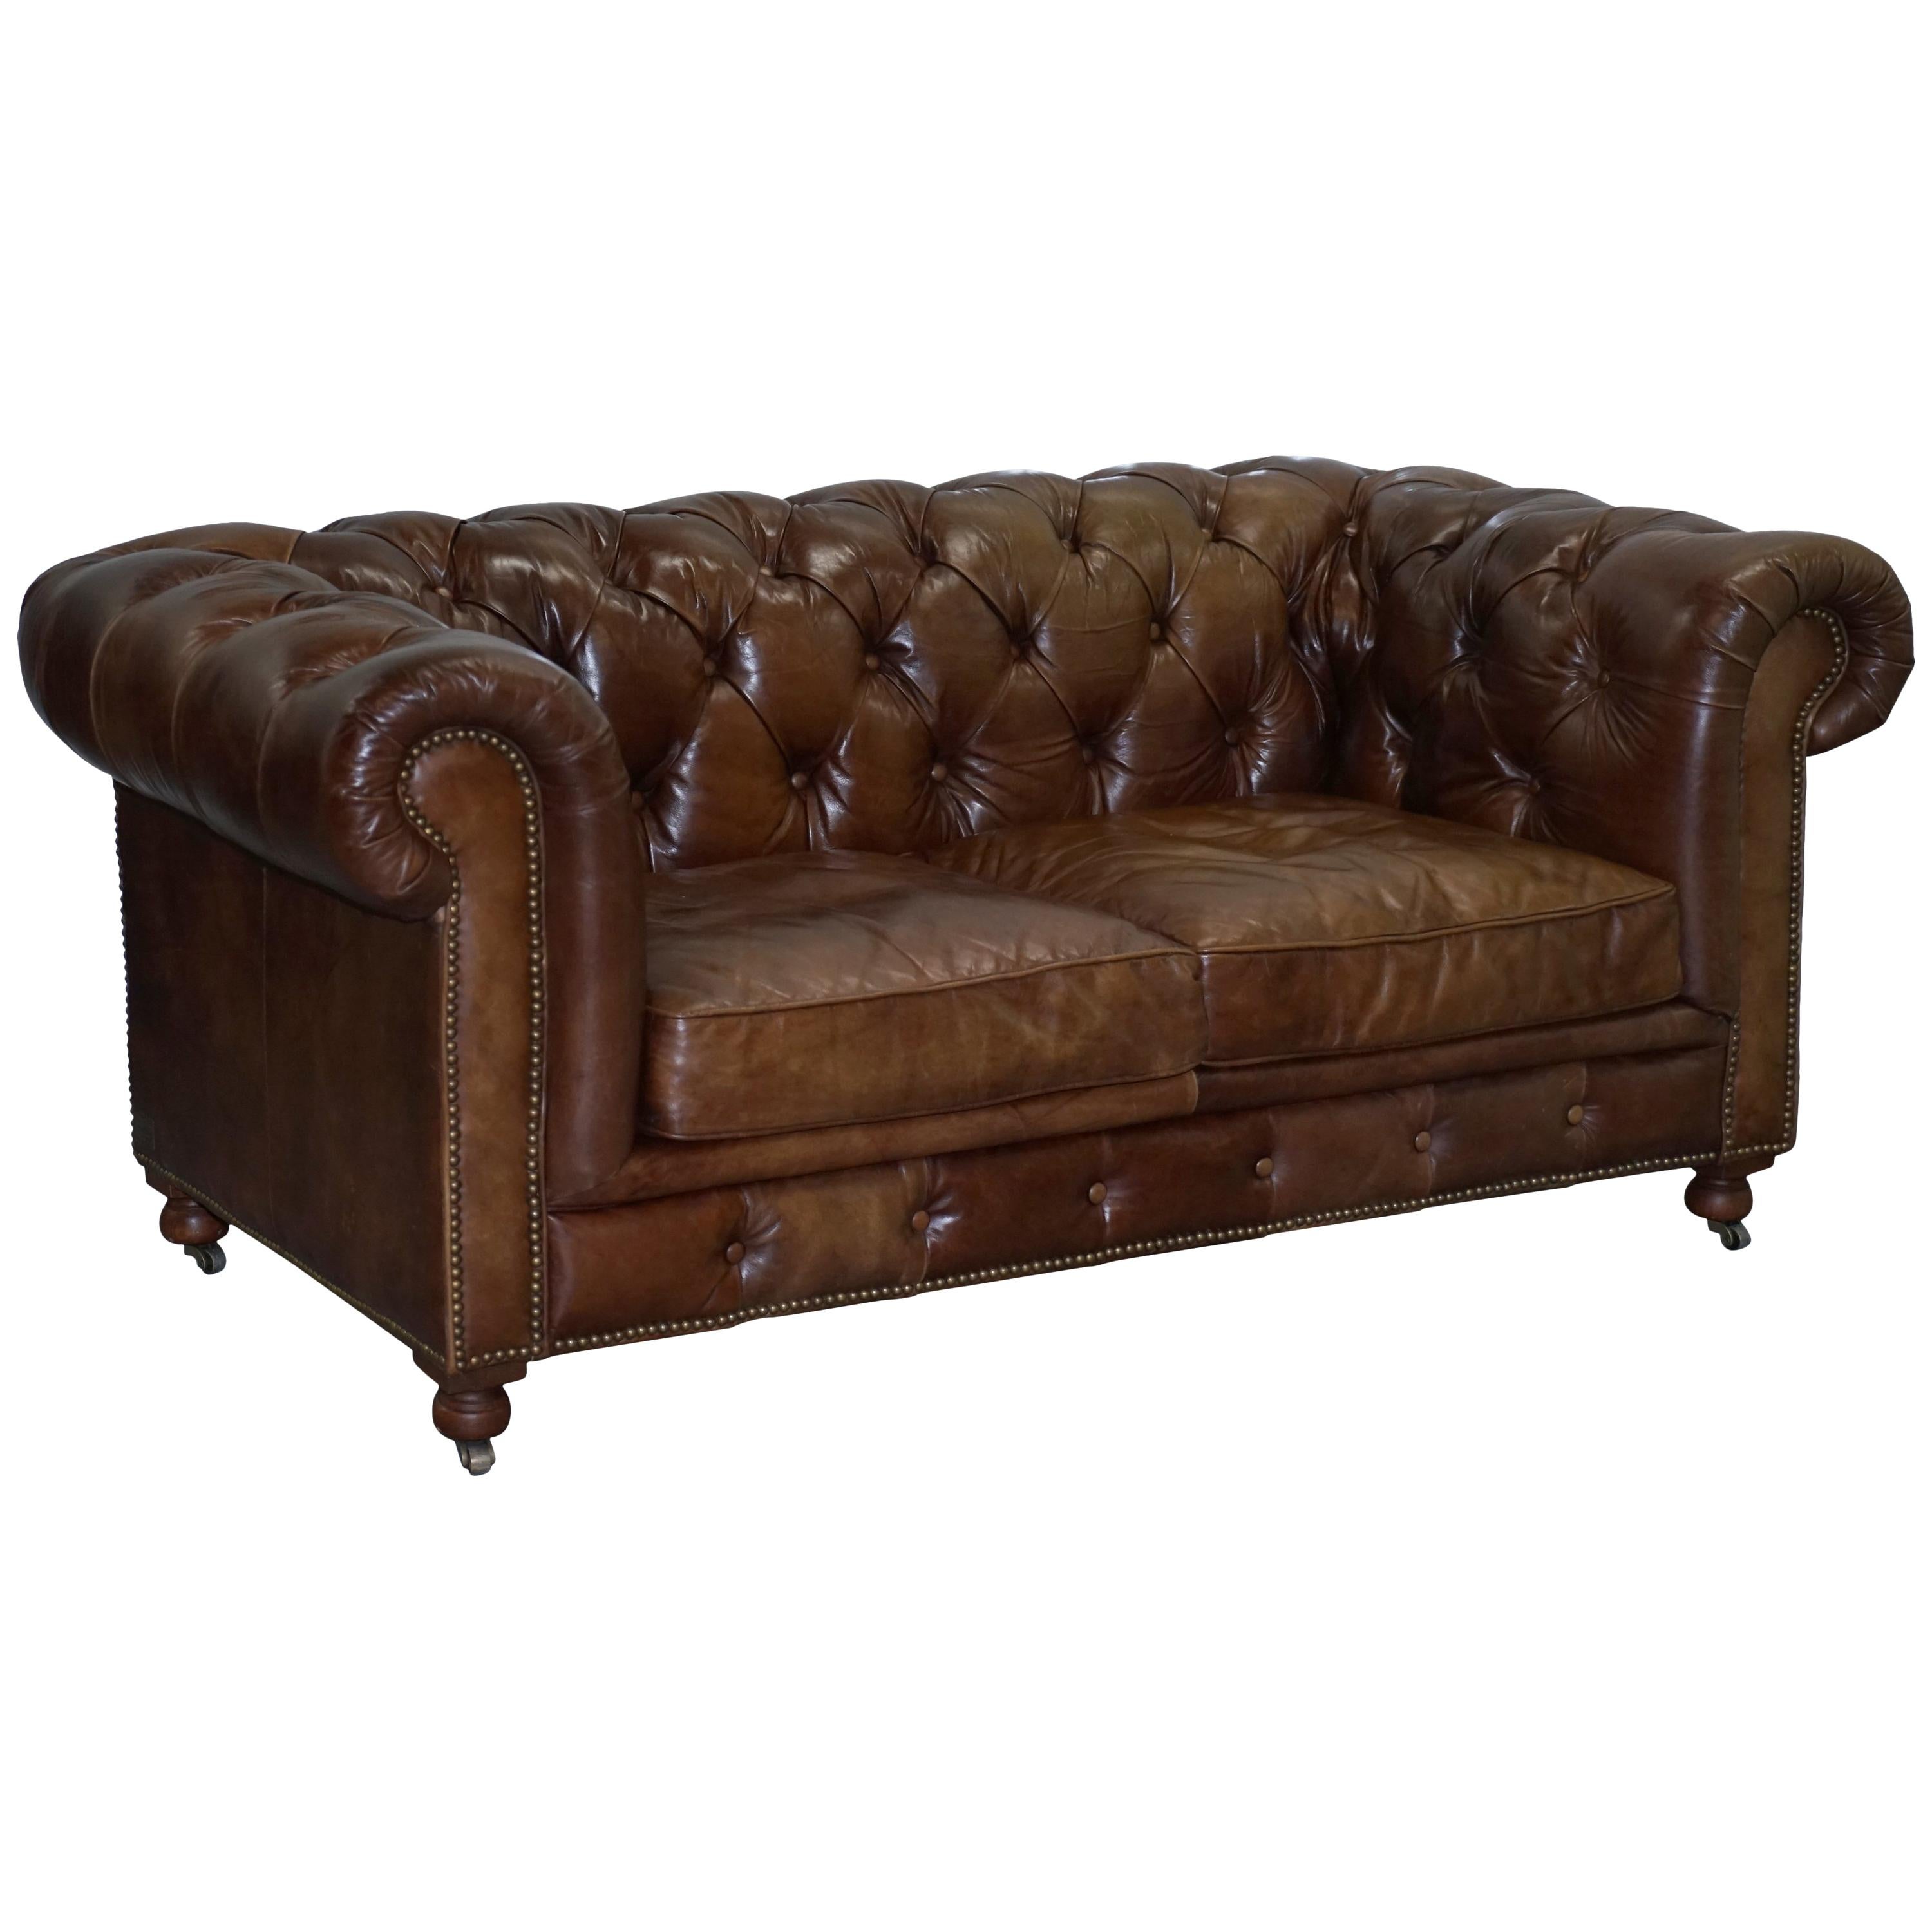 1 of 2 Timothy Oulton Halo Westminster Brown Leather Chesterfield Sofas